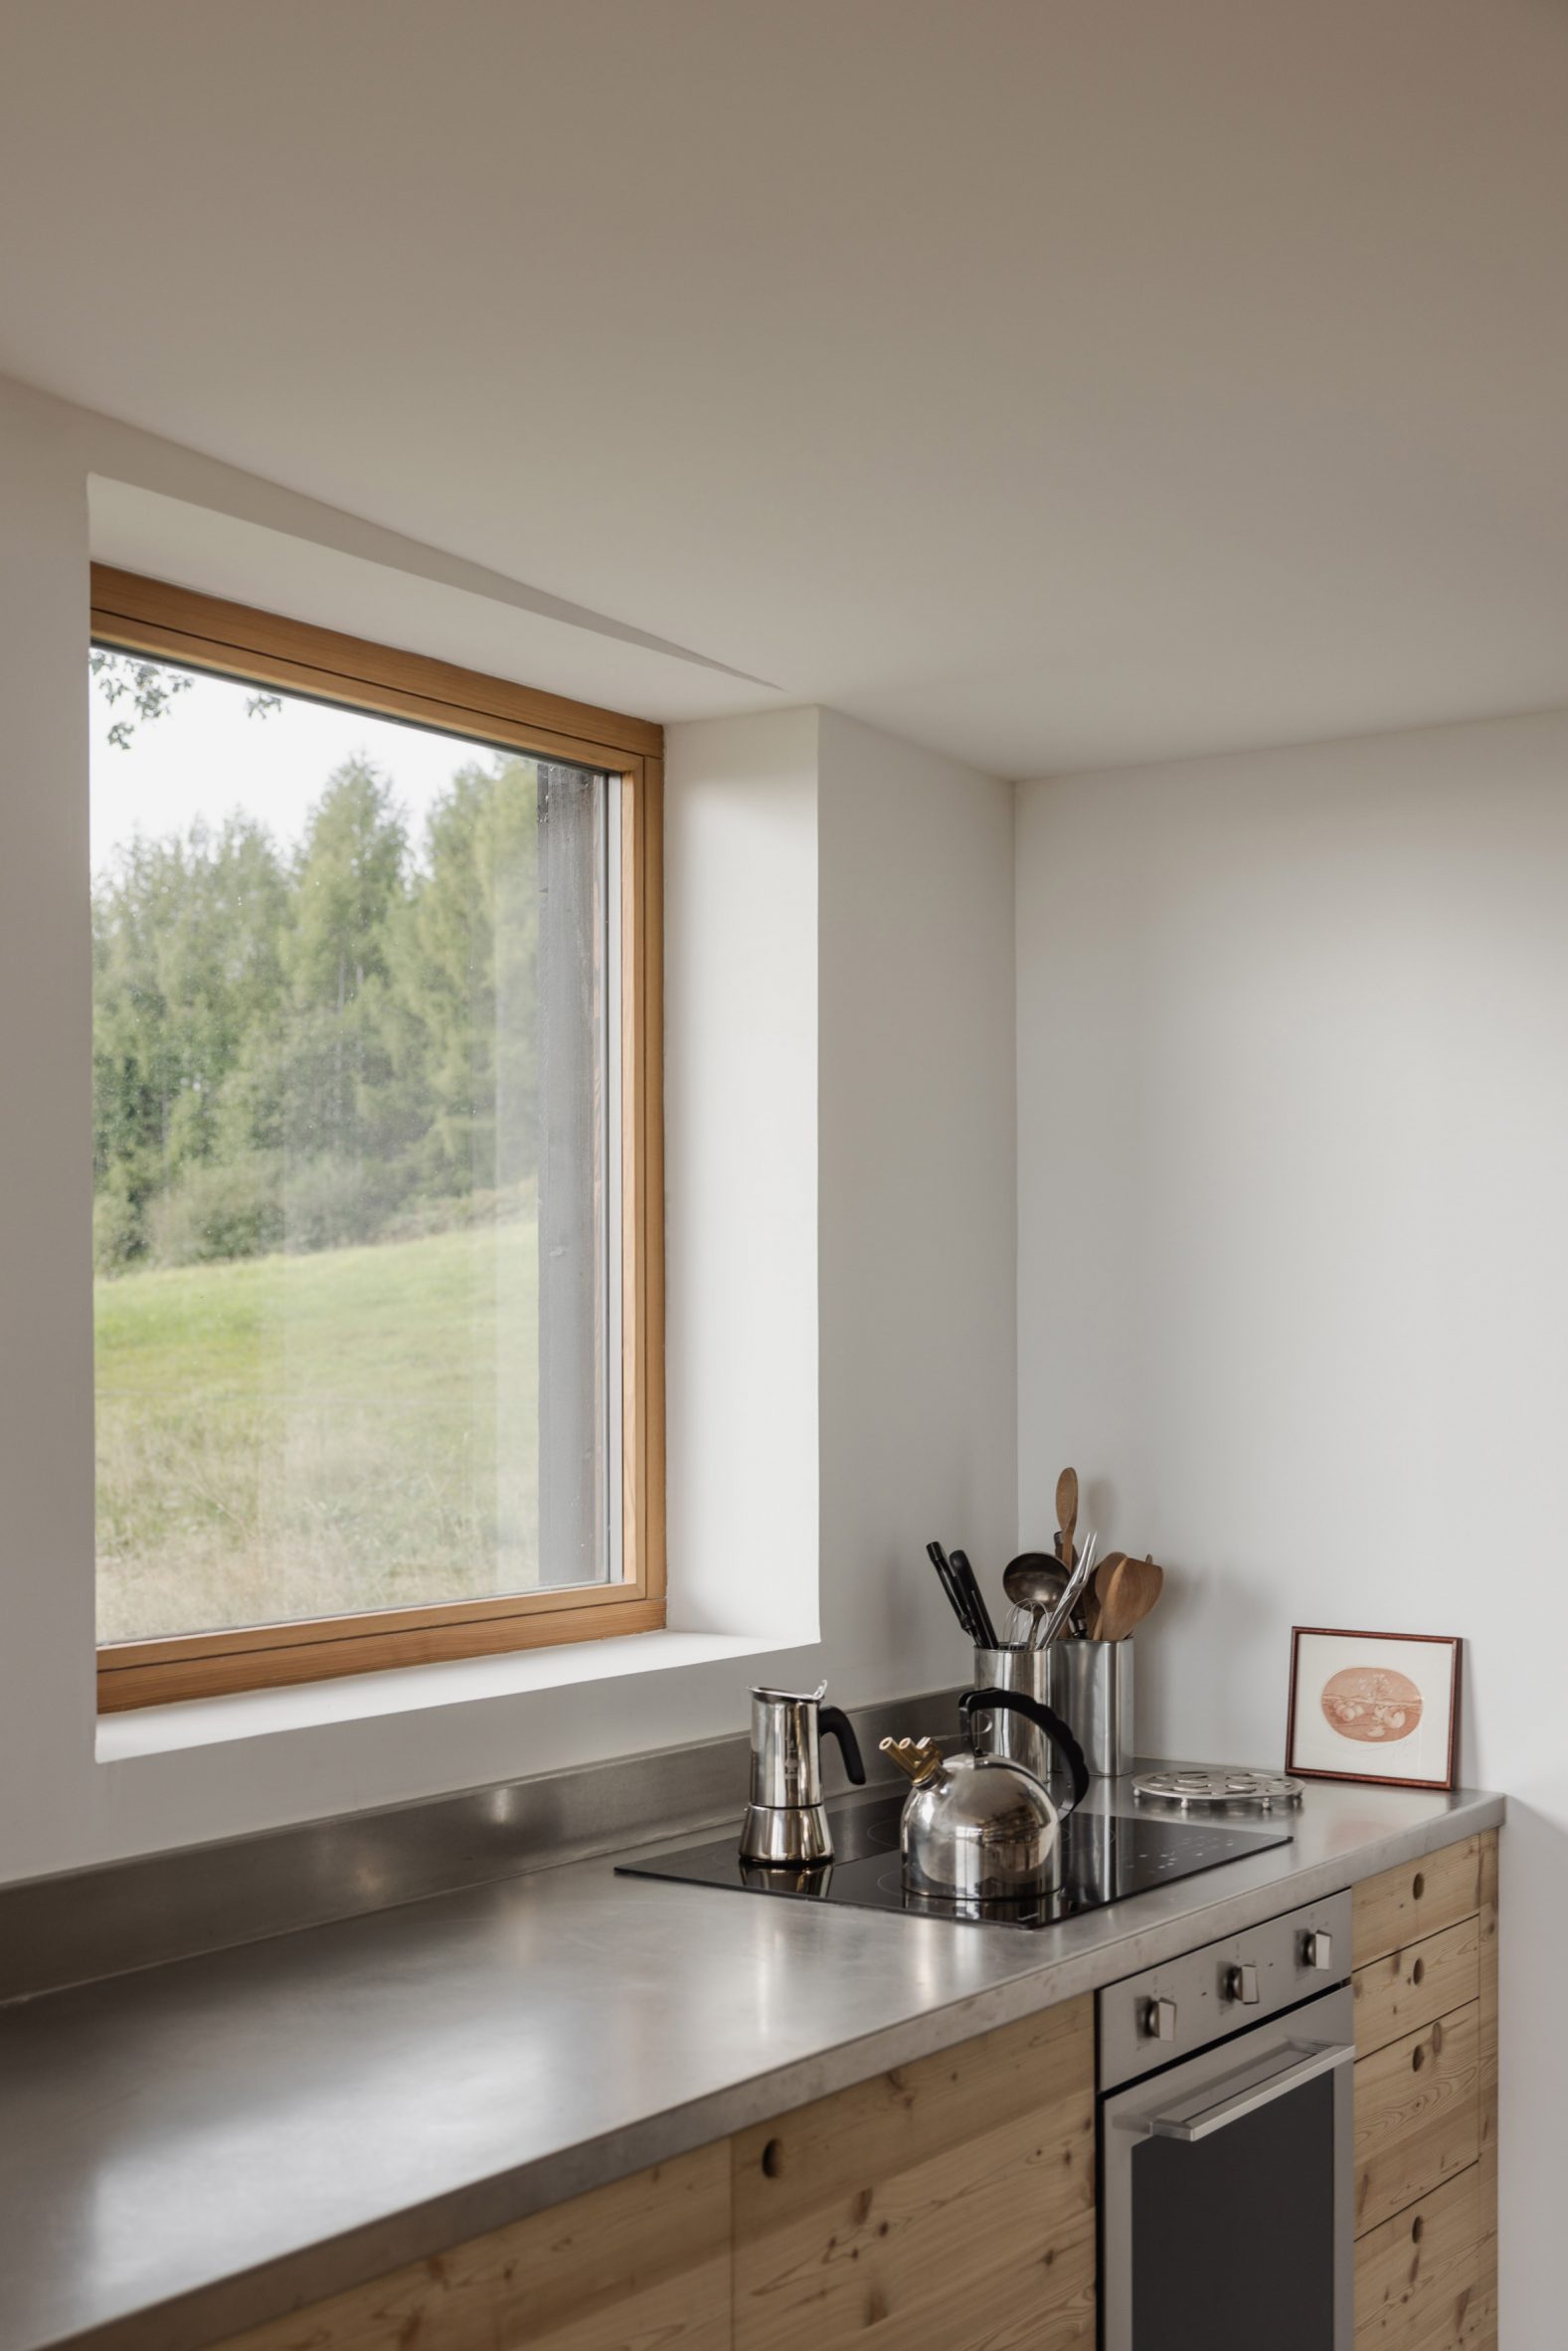 Image of a kitchen with squared window looking out to the hills